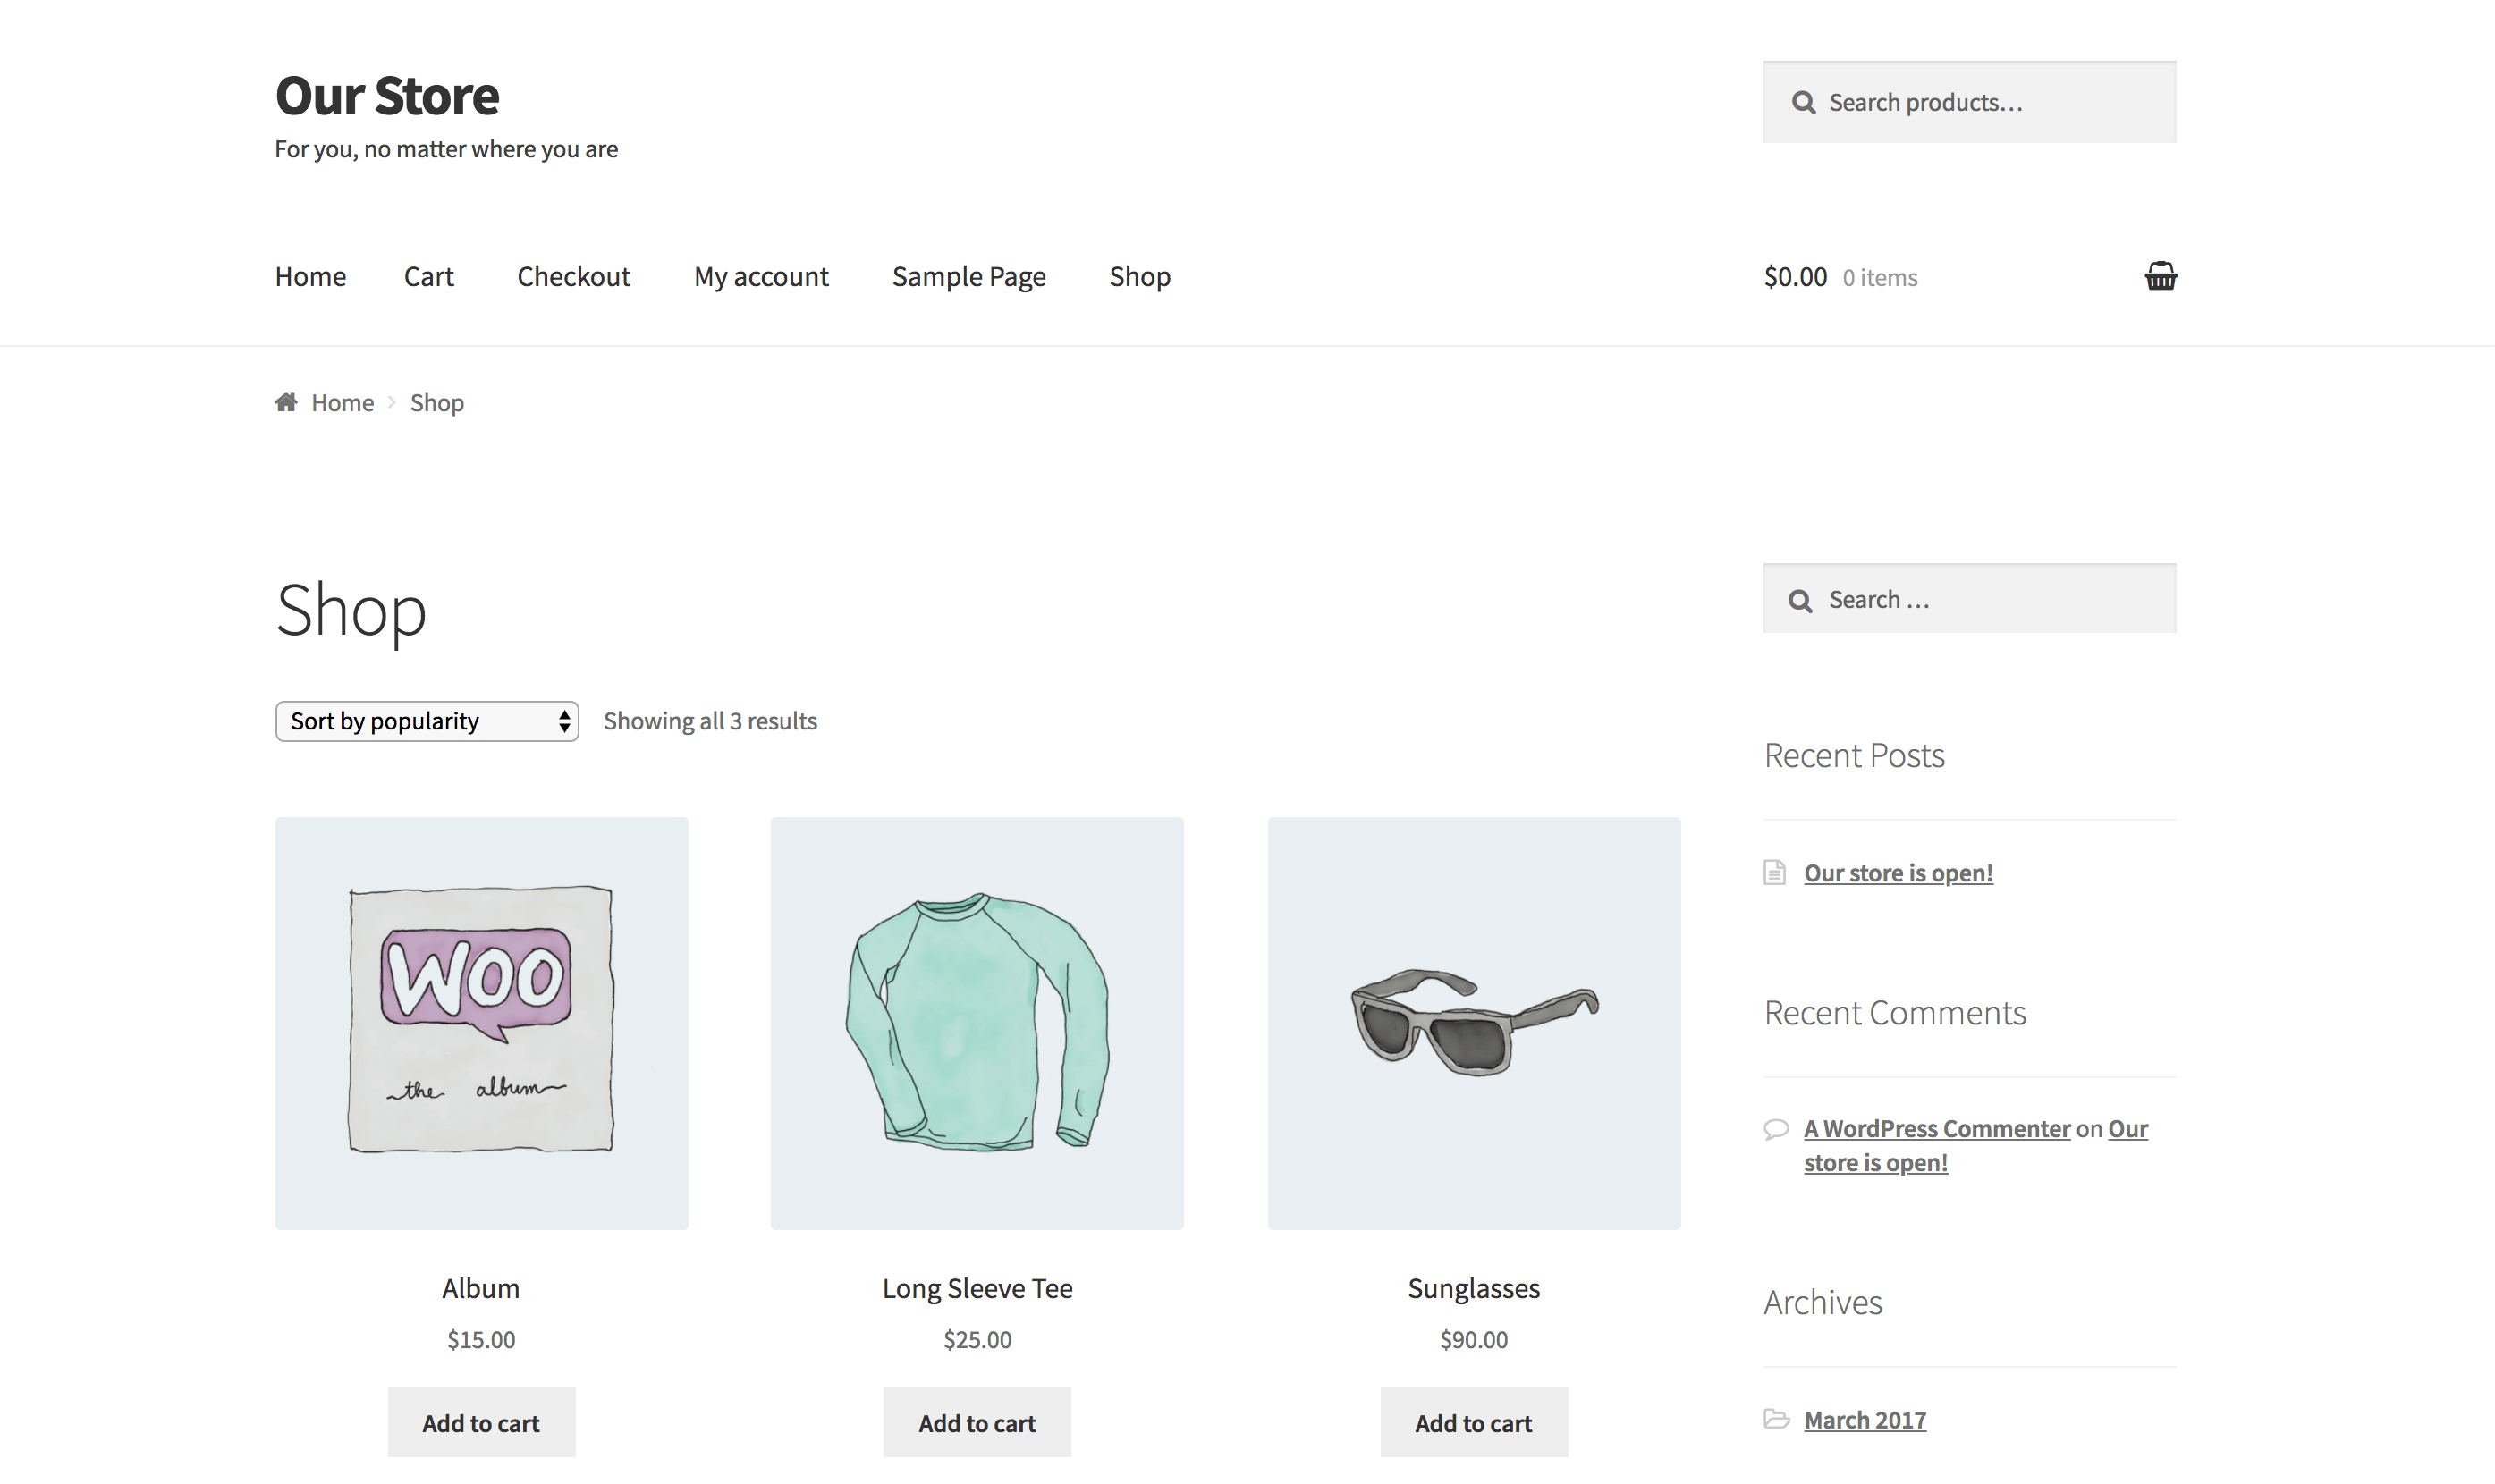 A WordPress site running WooCommerce and featuring sample products.